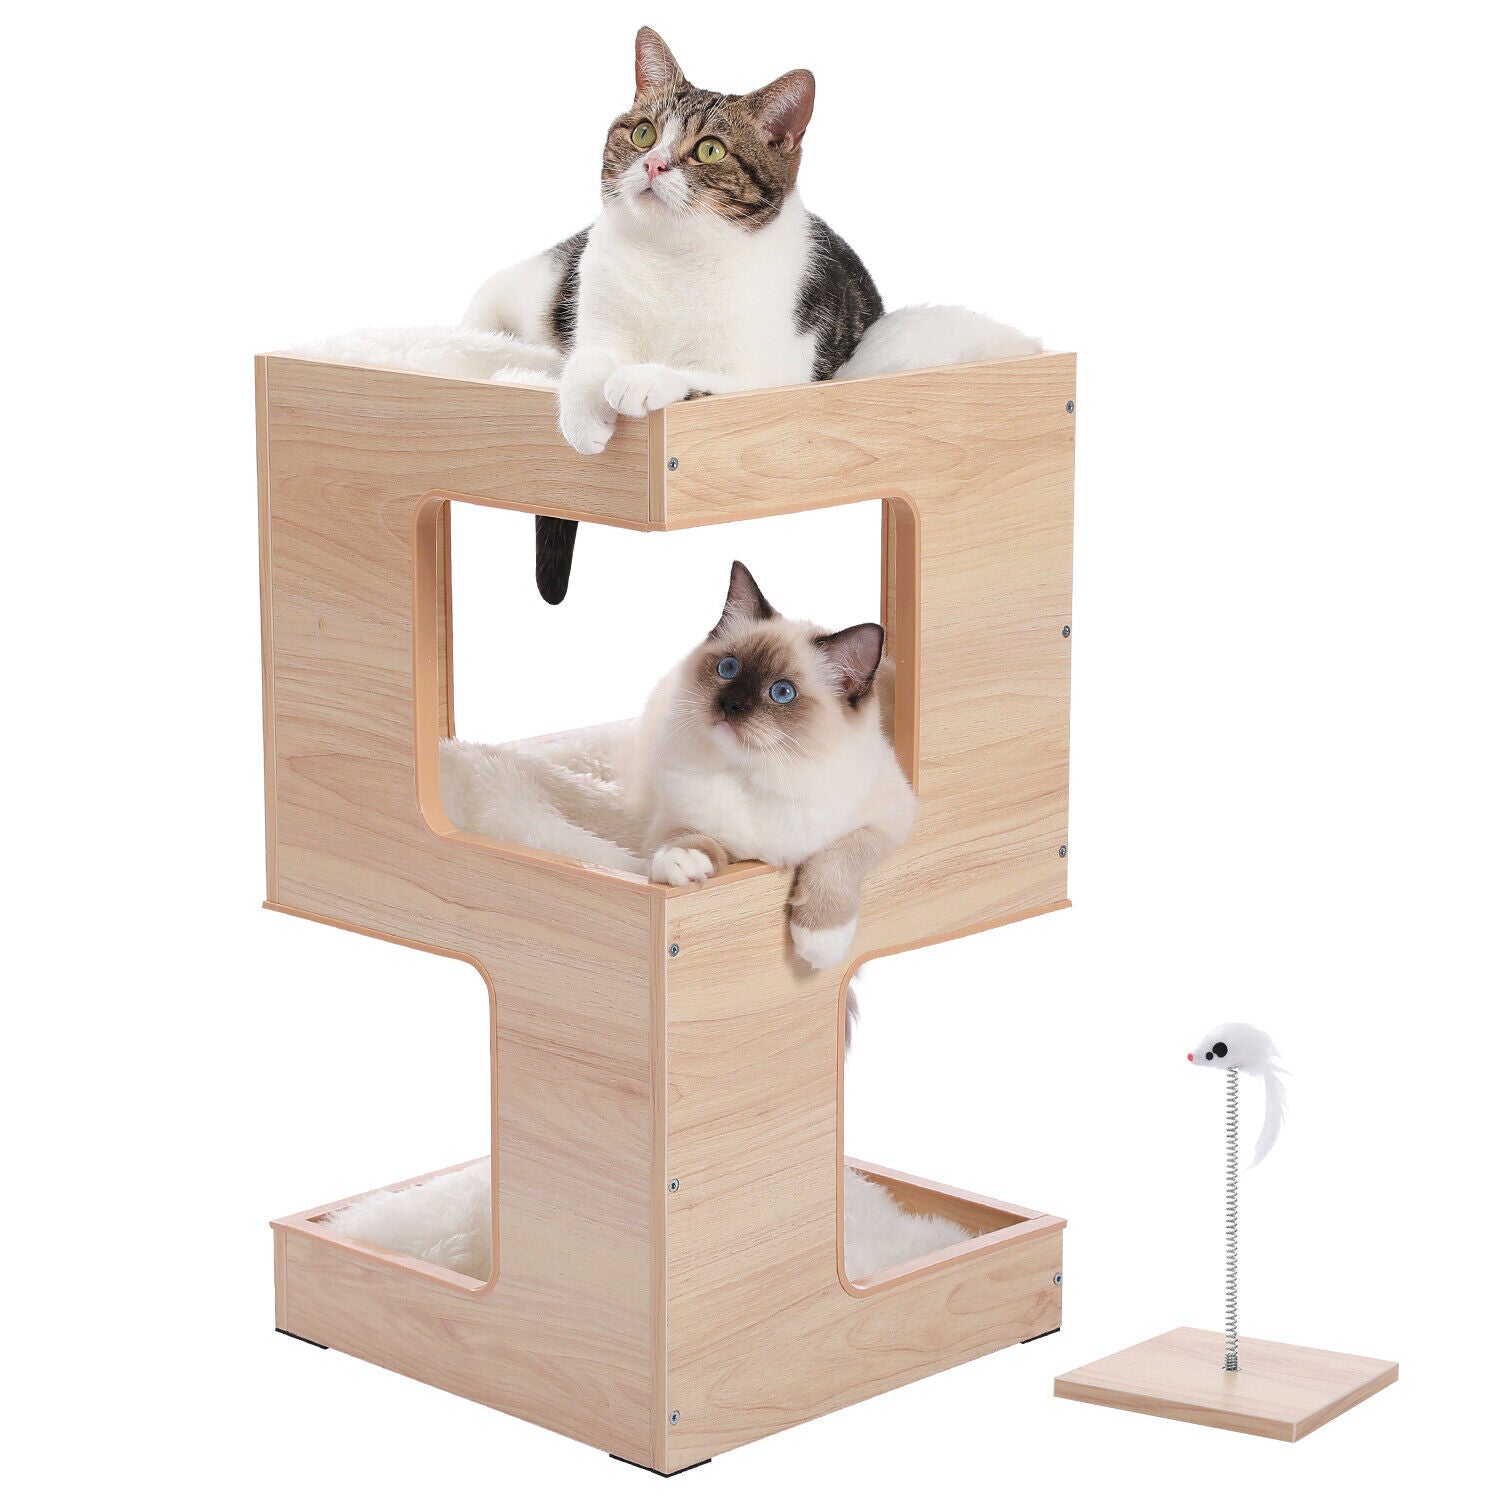 NEW Cat Tree Bed Bedside Tables Tower Condo House Scratcher Furniture Toy